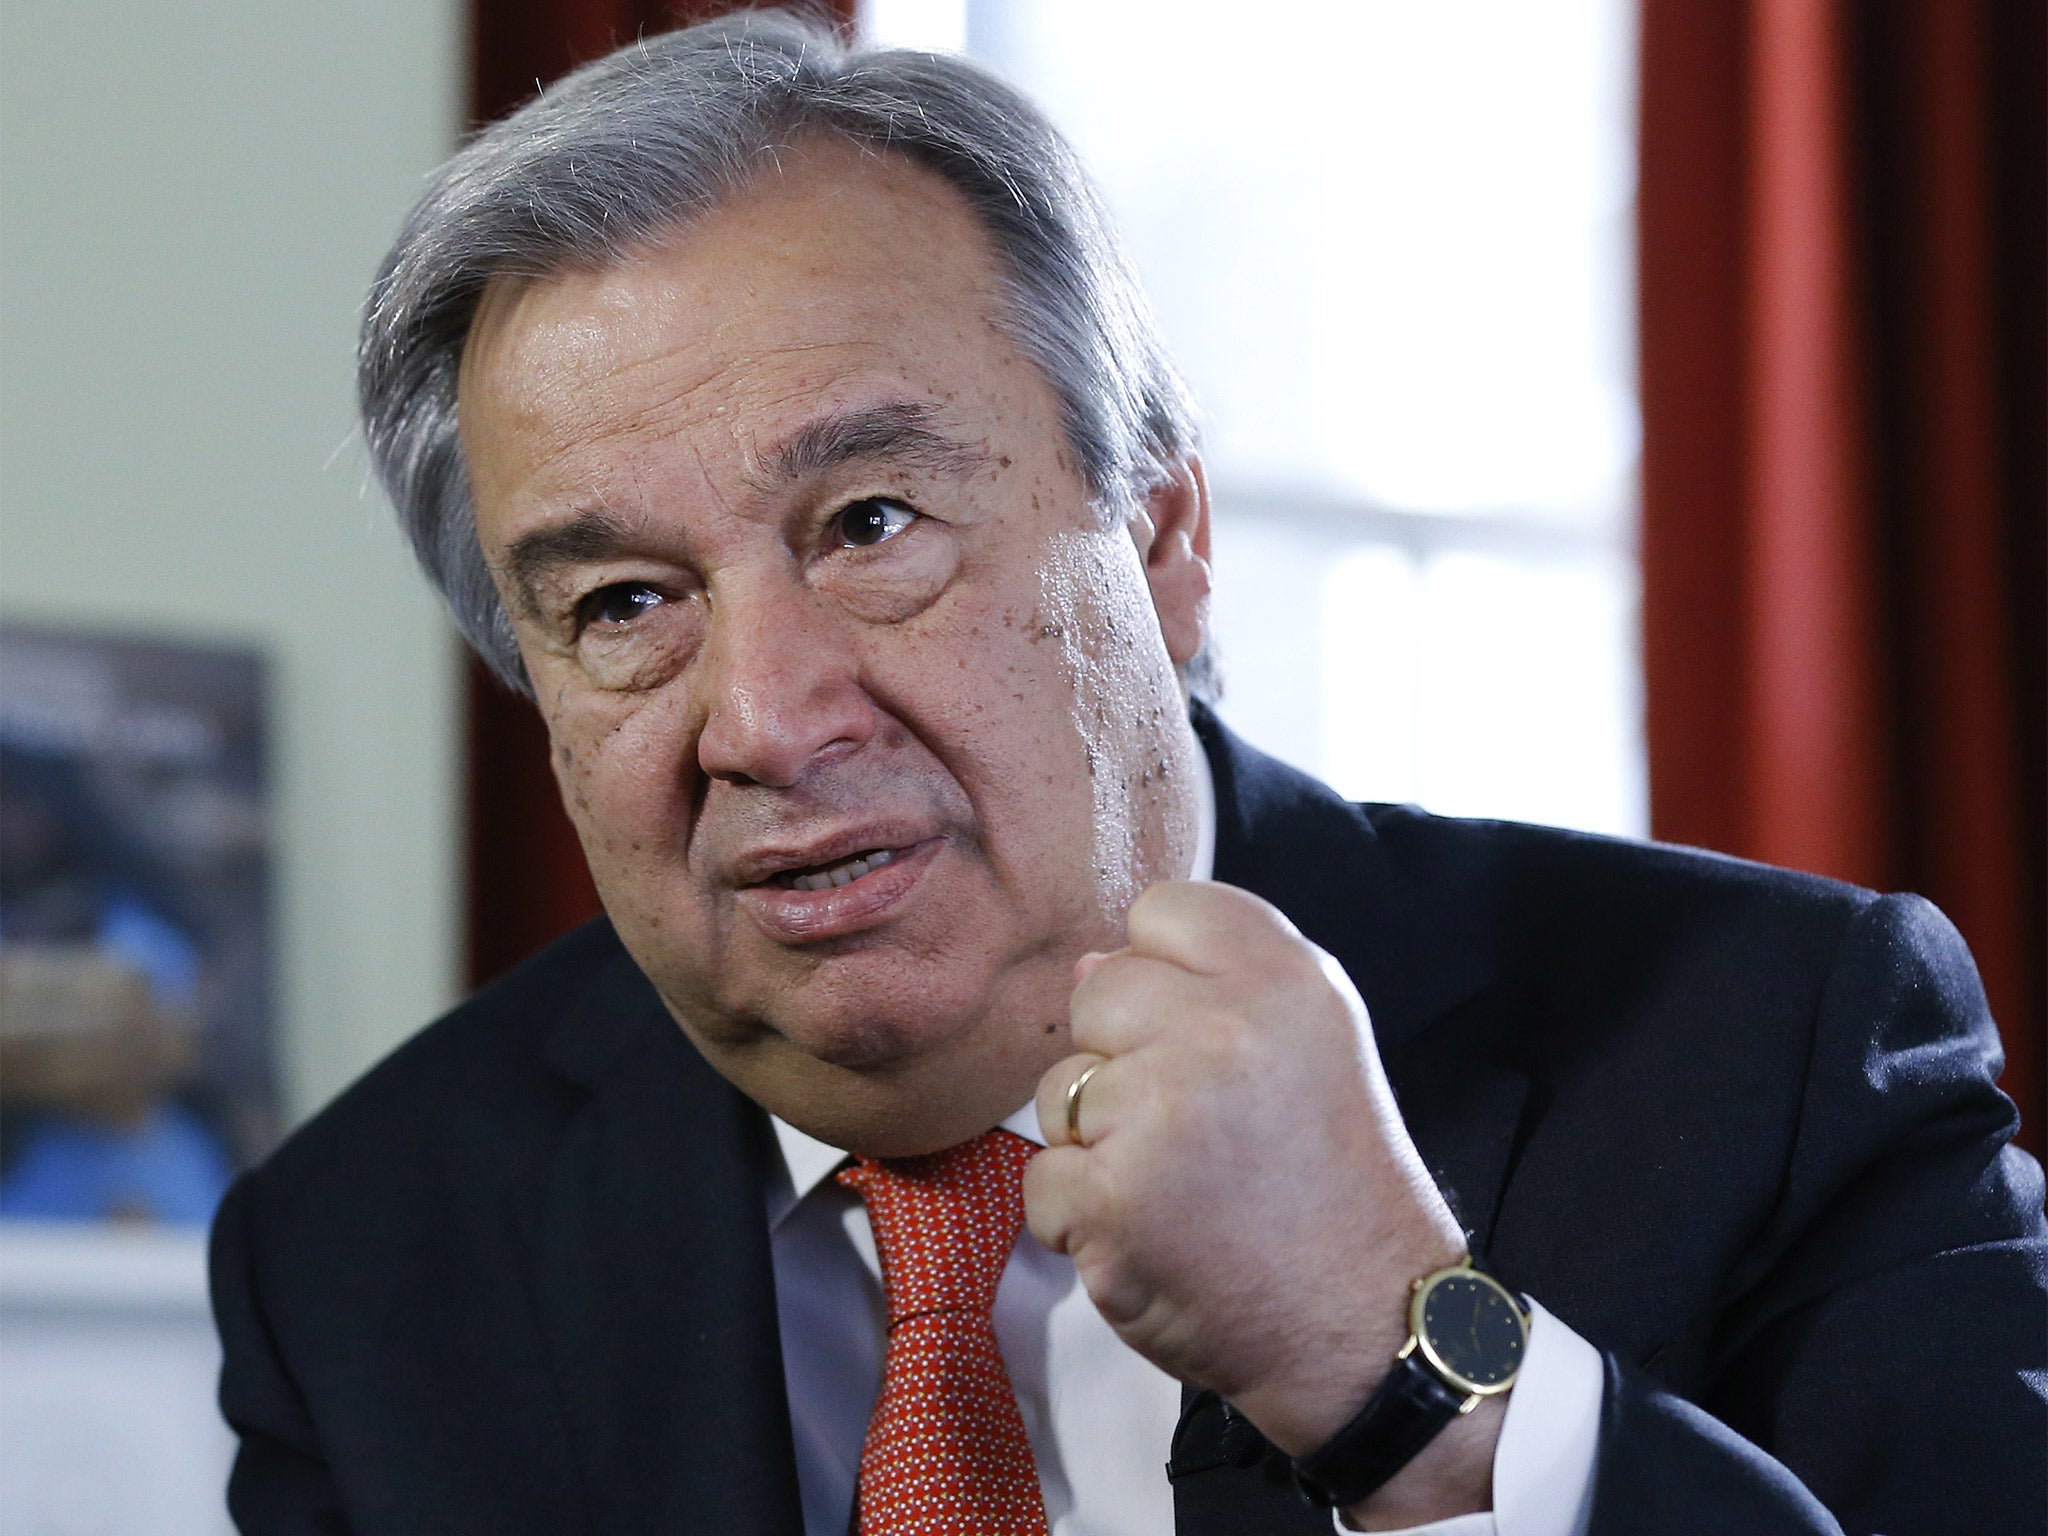 Antonio Guterres, the United Nations High Commissioner for Refugees